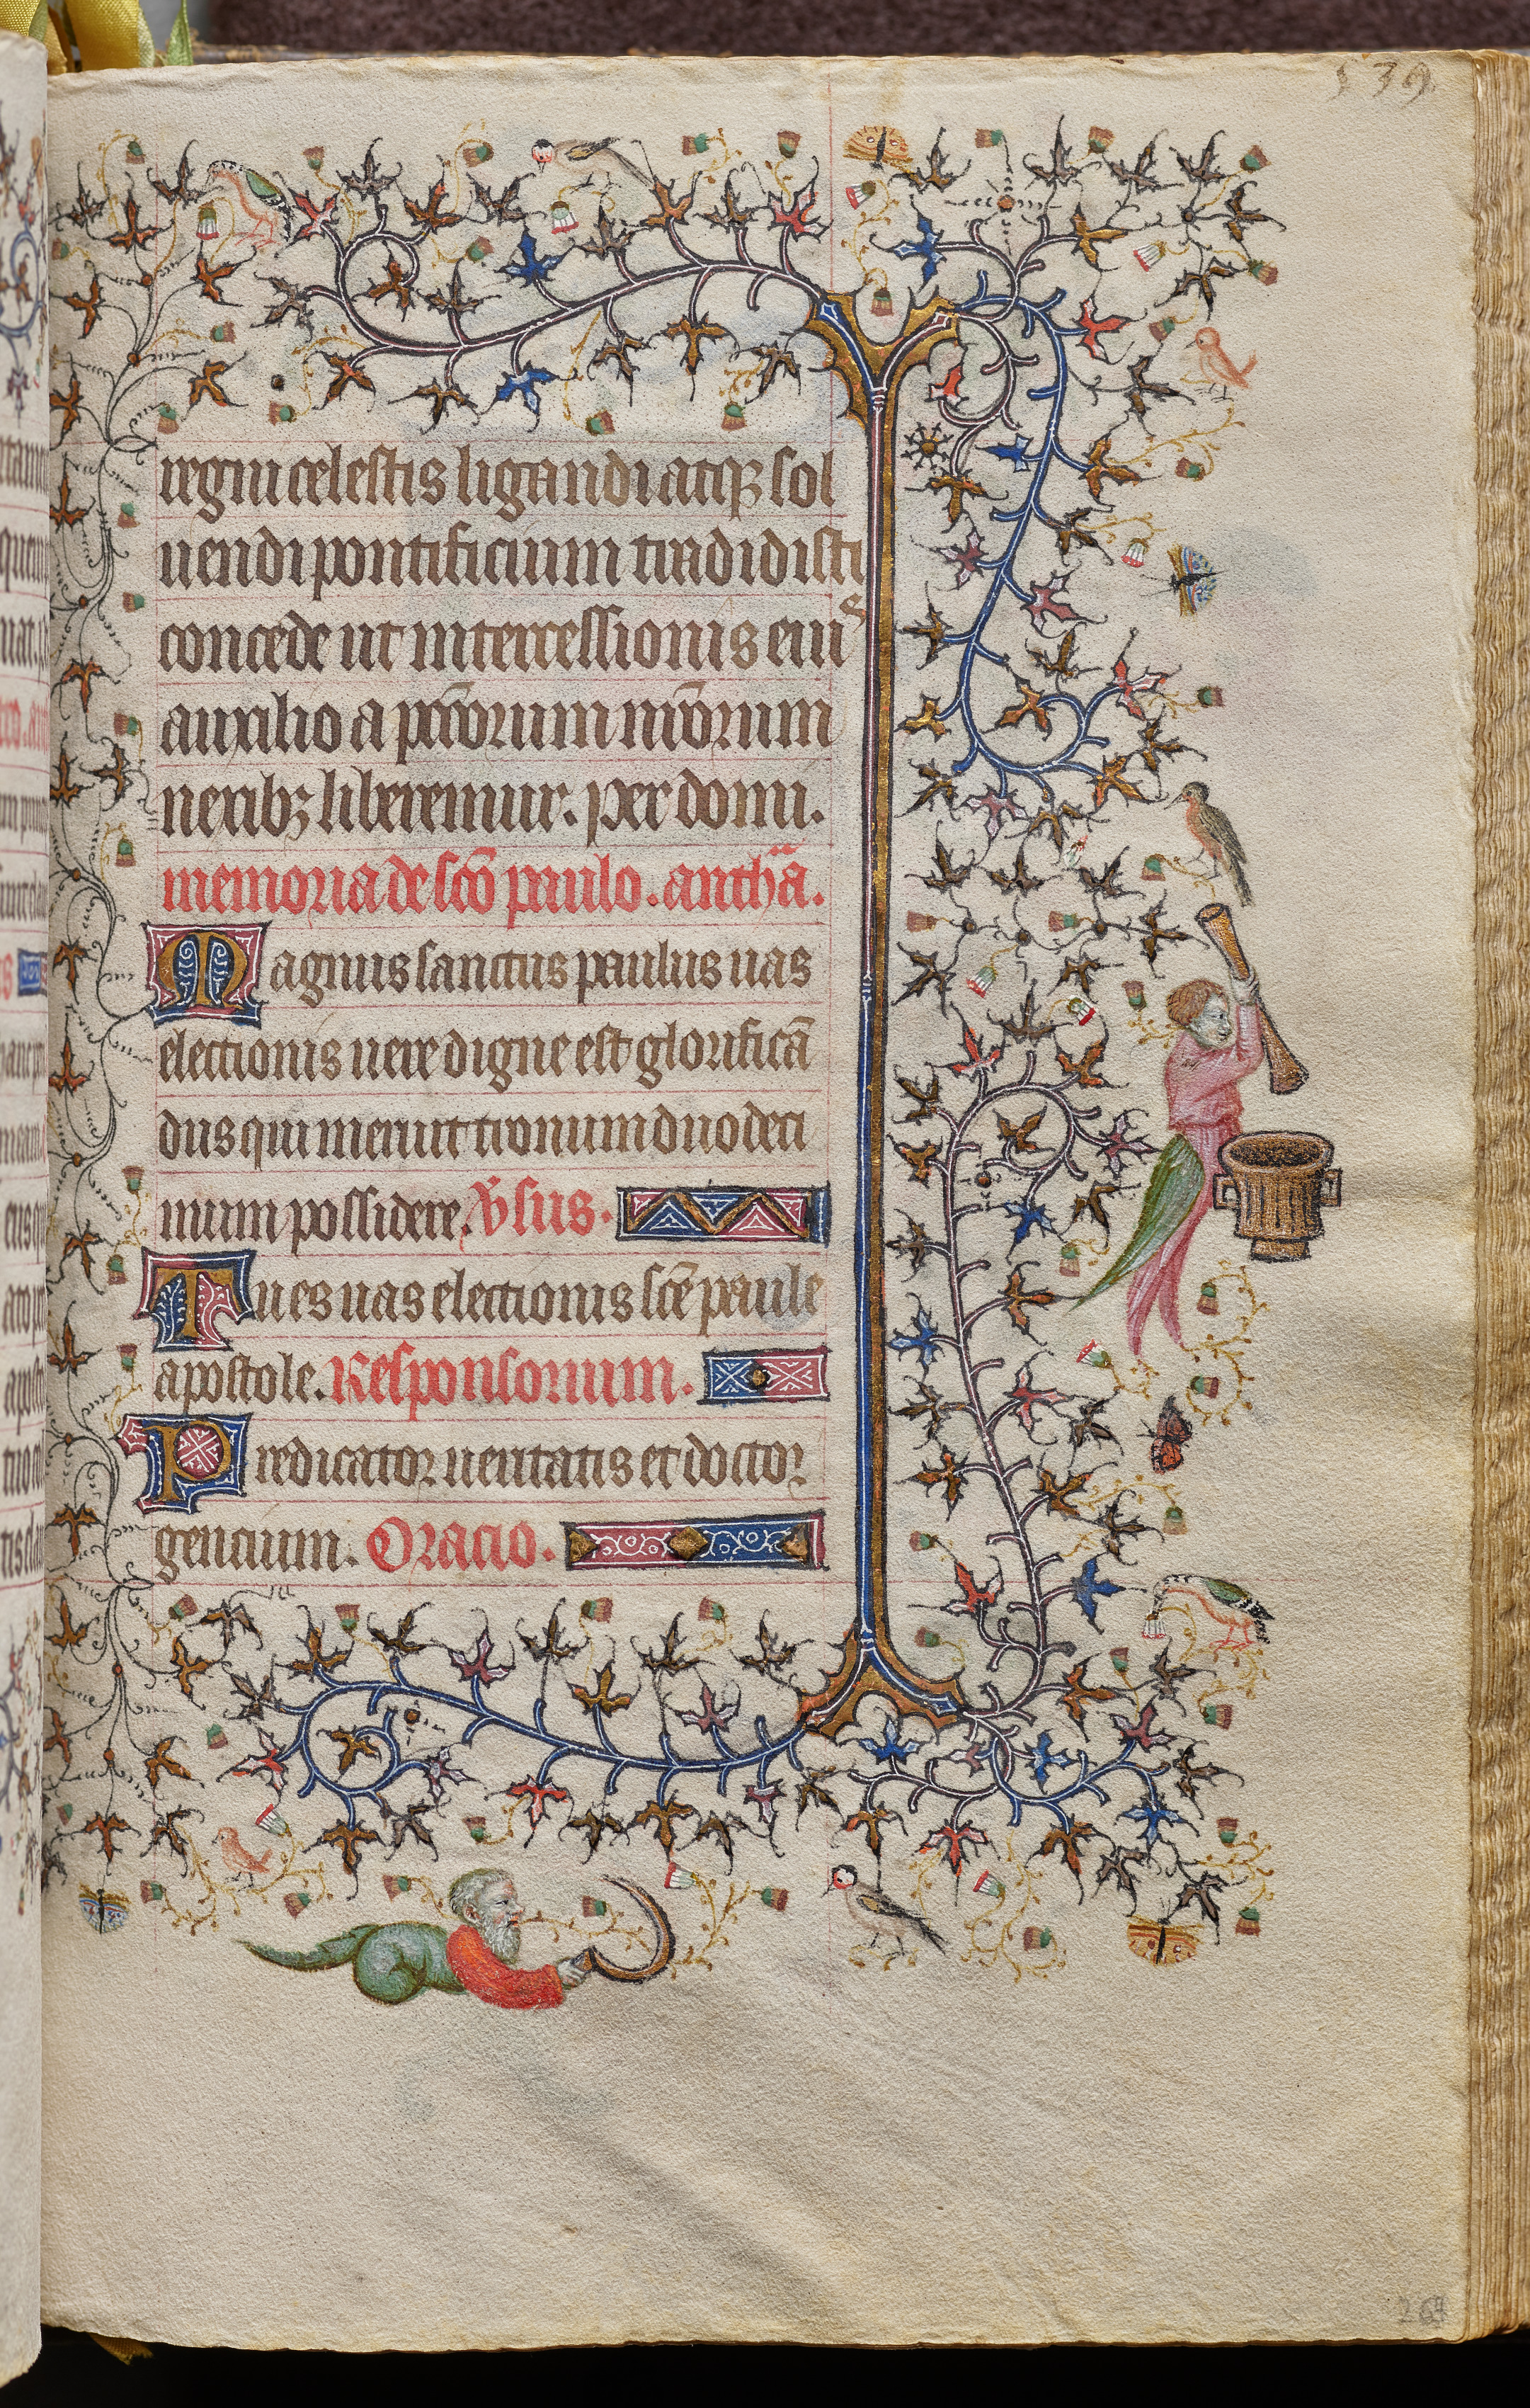 Hours of Charles the Noble, King of Navarre (1361-1425): fol. 264r, Text